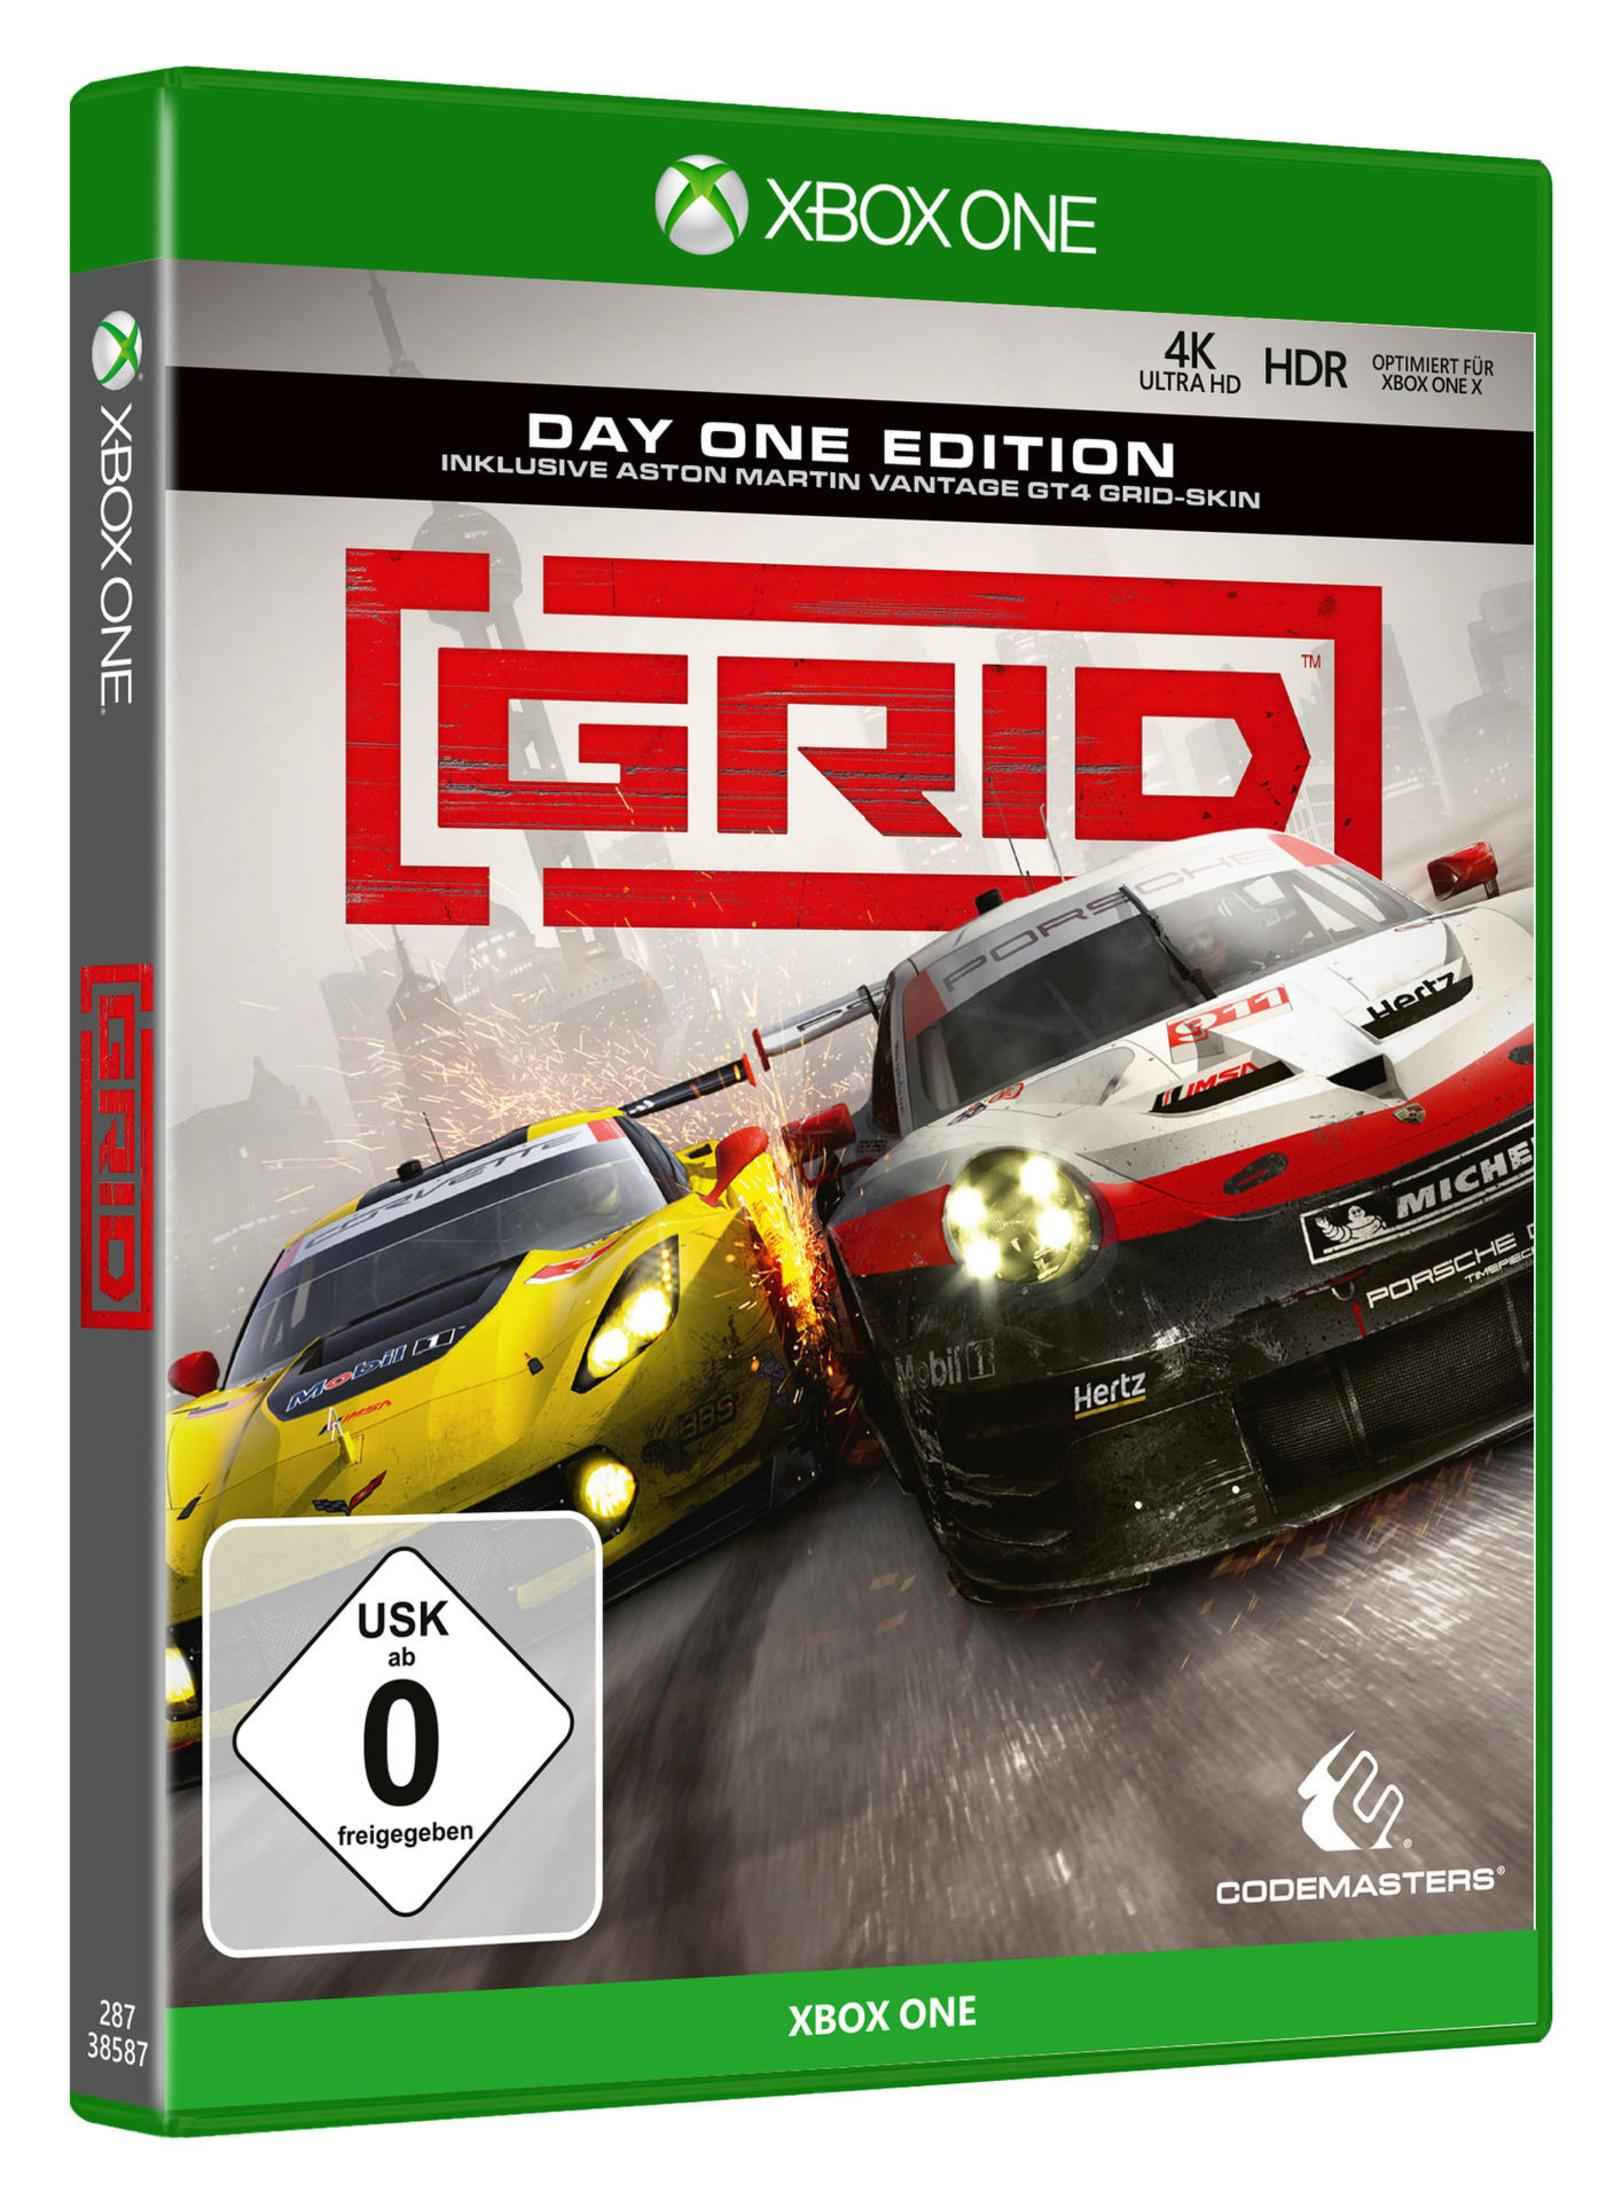 One] - One Day - Edition Grid [Xbox